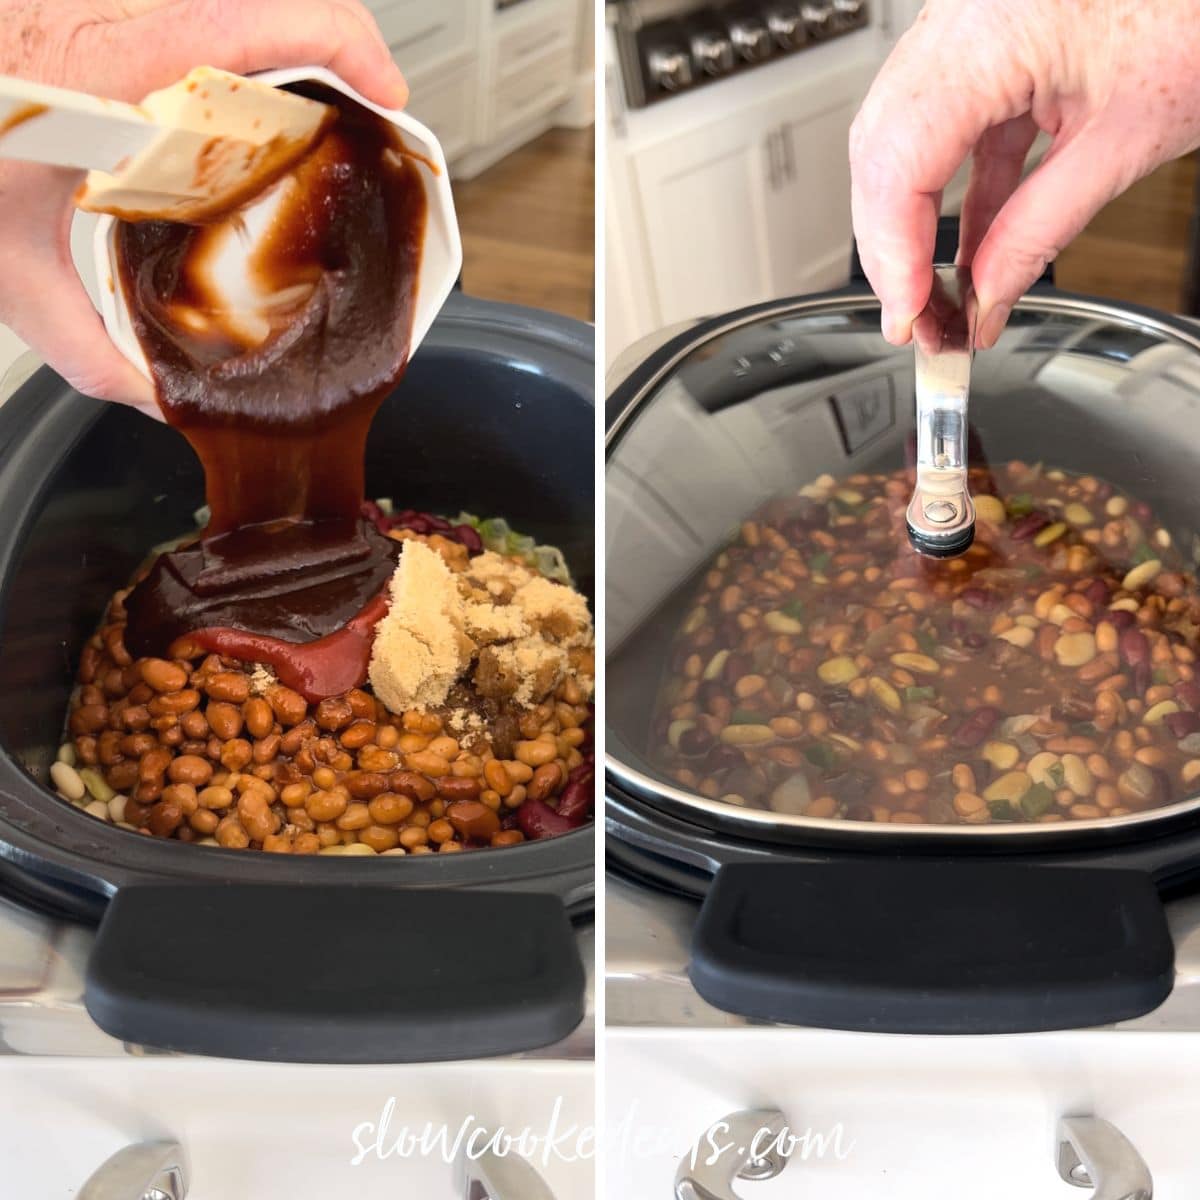 Adding the ingredients and covering the black crock pot with a lid.